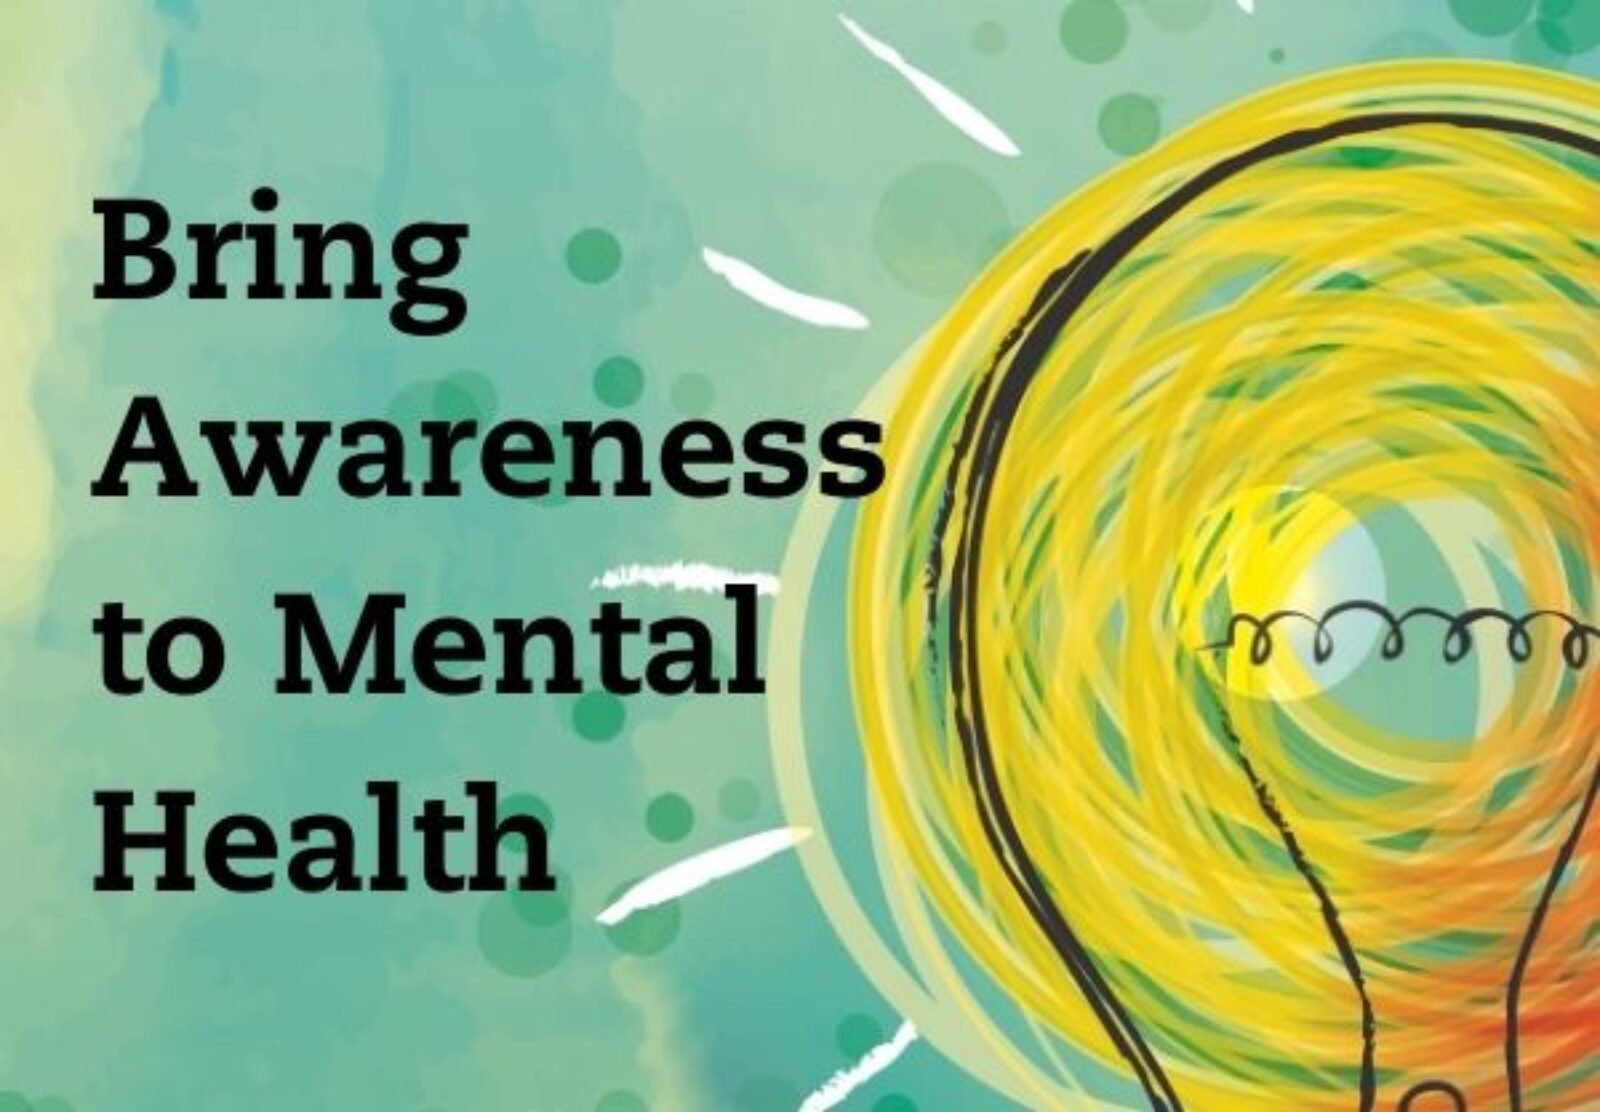 Join us in May to Bring Awareness to Mental Health